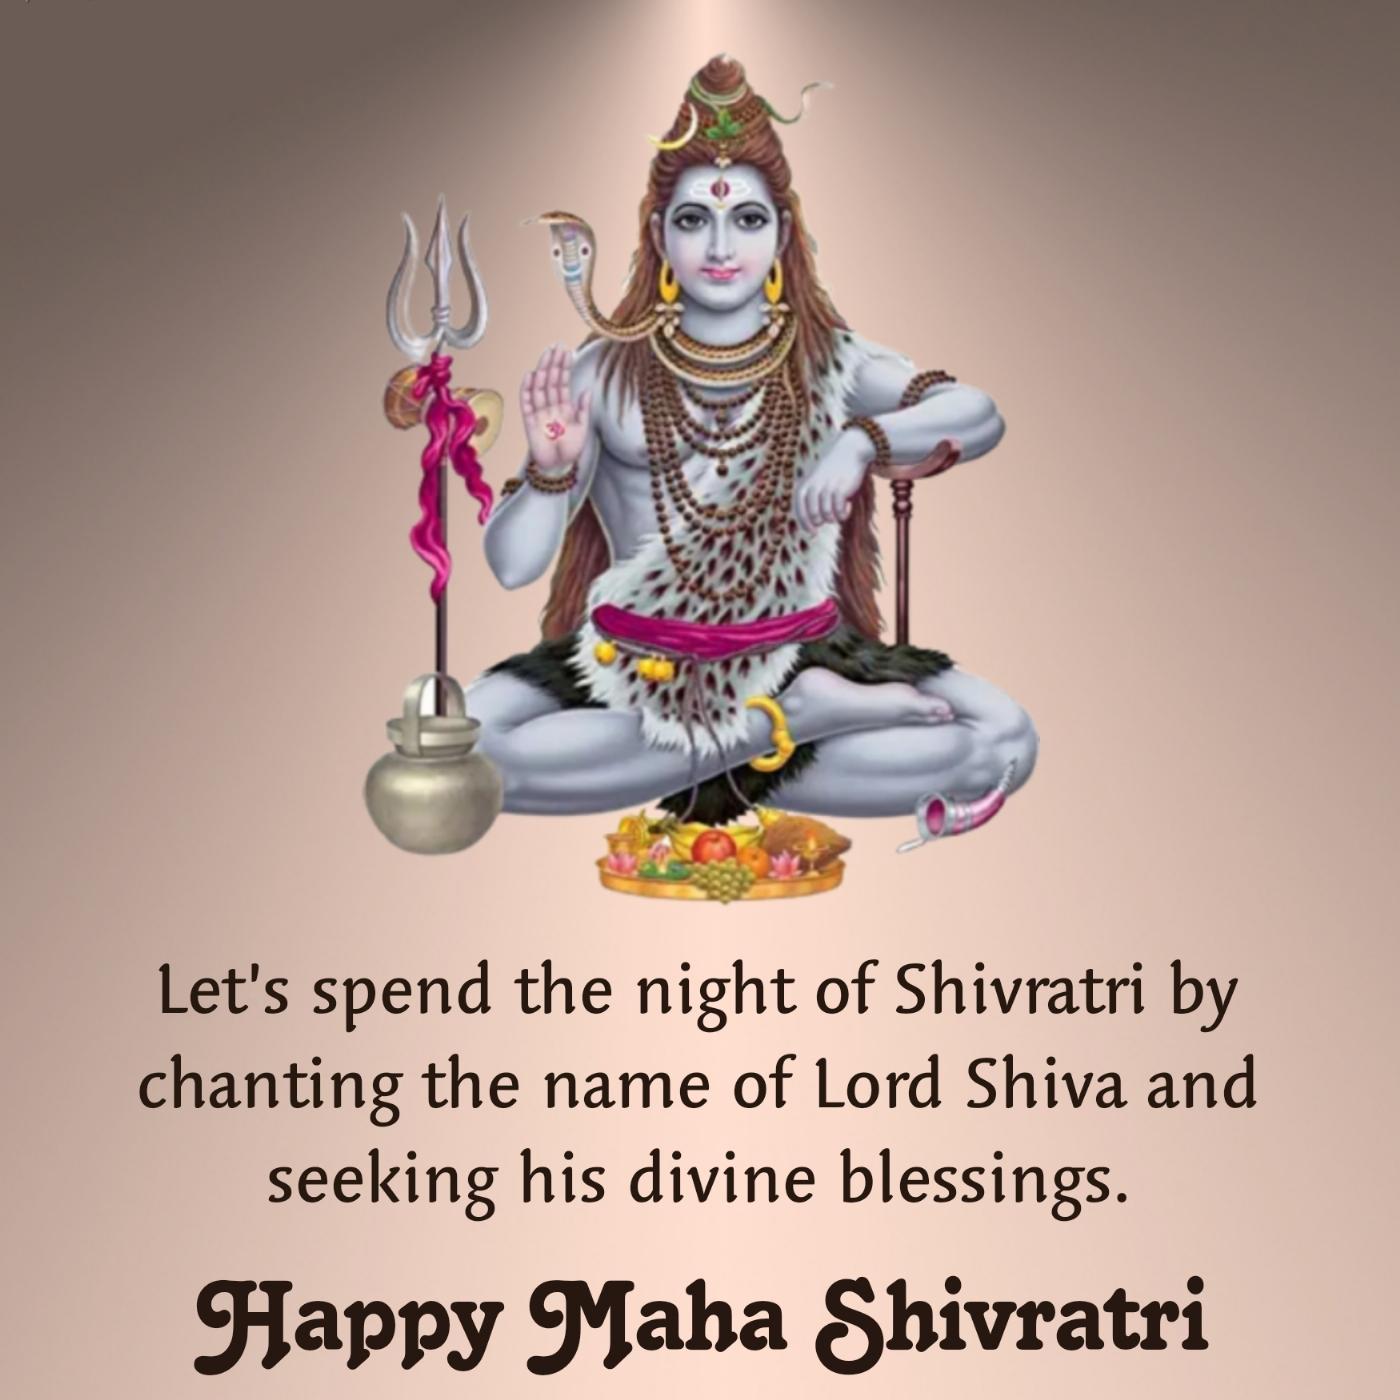 Lets spend the night of Shivratri by chanting the name of Lord Shiva